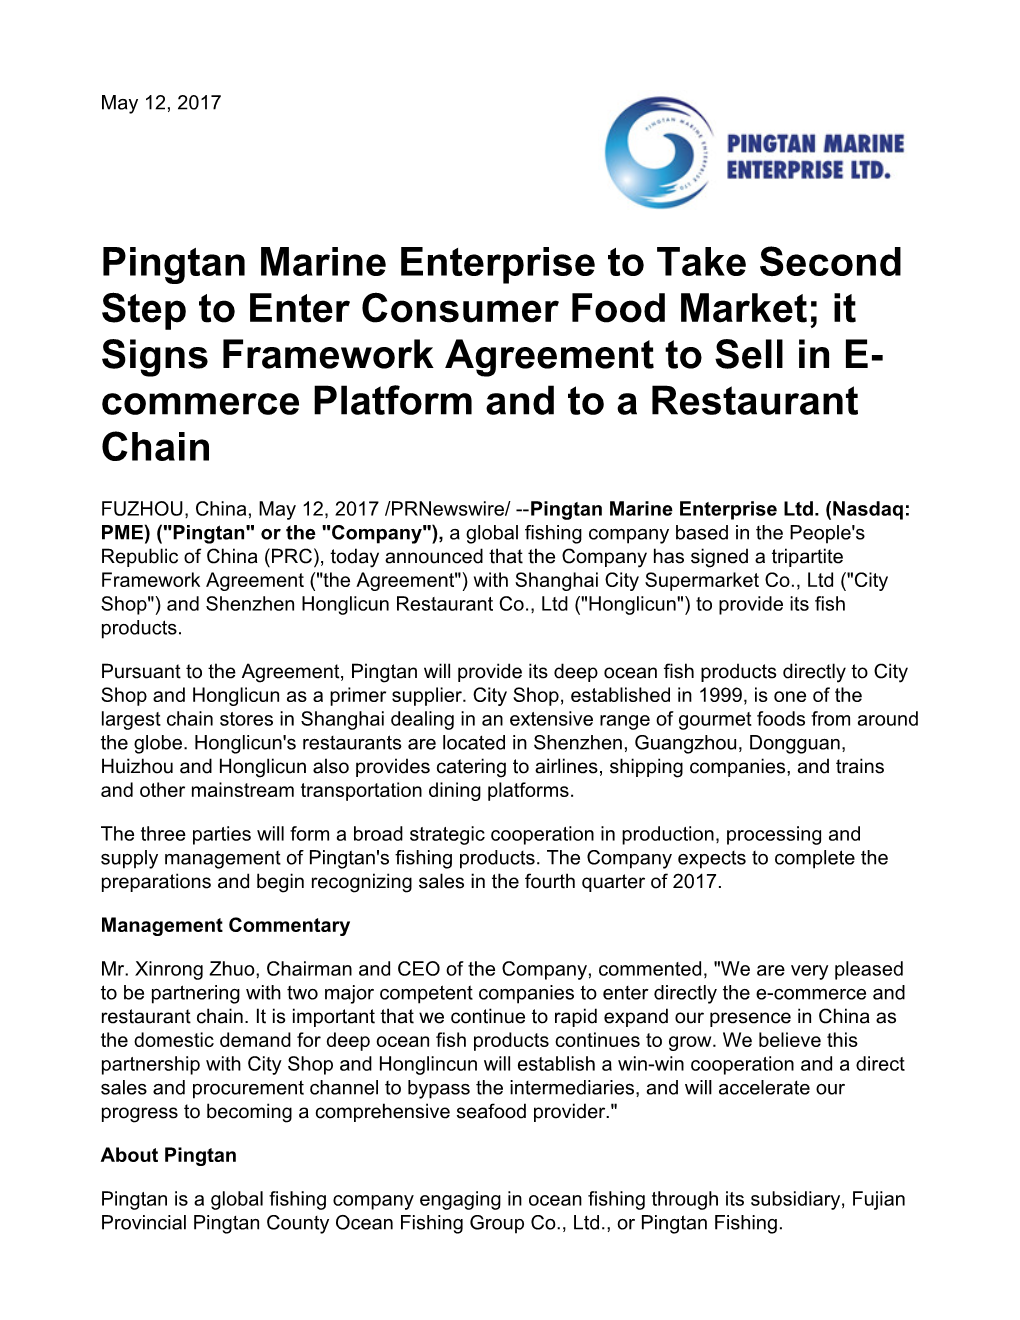 Pingtan Marine Enterprise to Take Second Step to Enter Consumer Food Market; It Signs Framework Agreement to Sell in E- Commerce Platform and to a Restaurant Chain